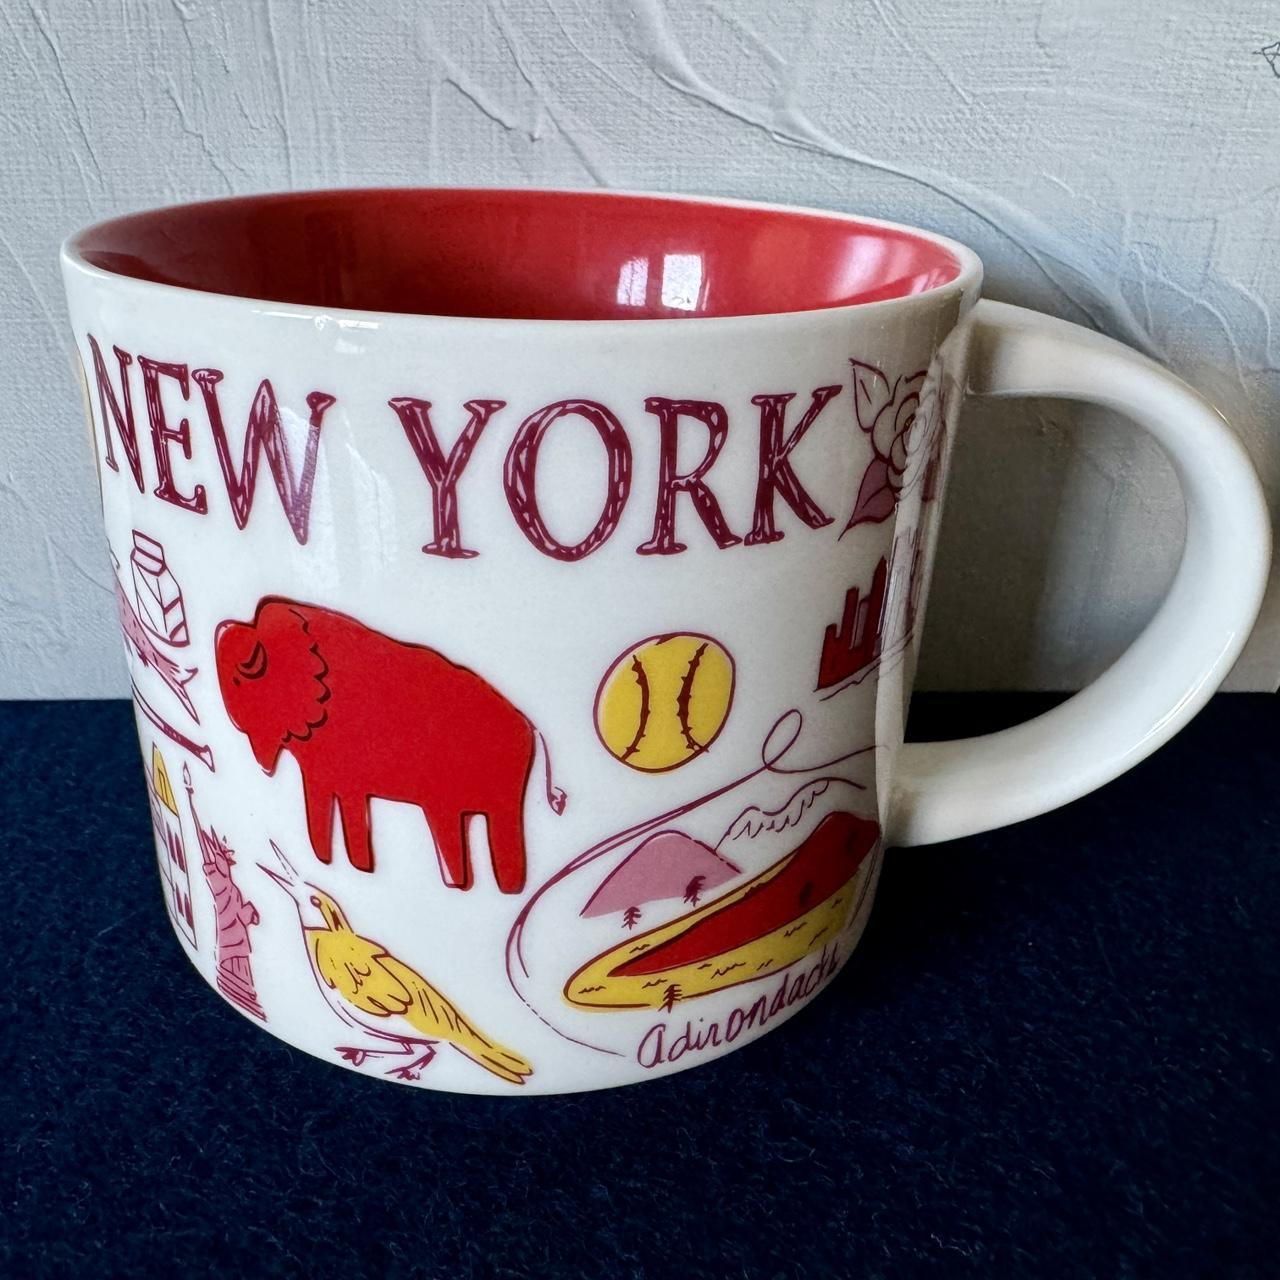 Starbucks Been There Series Collection New York City Coffee Mug New With  Box 